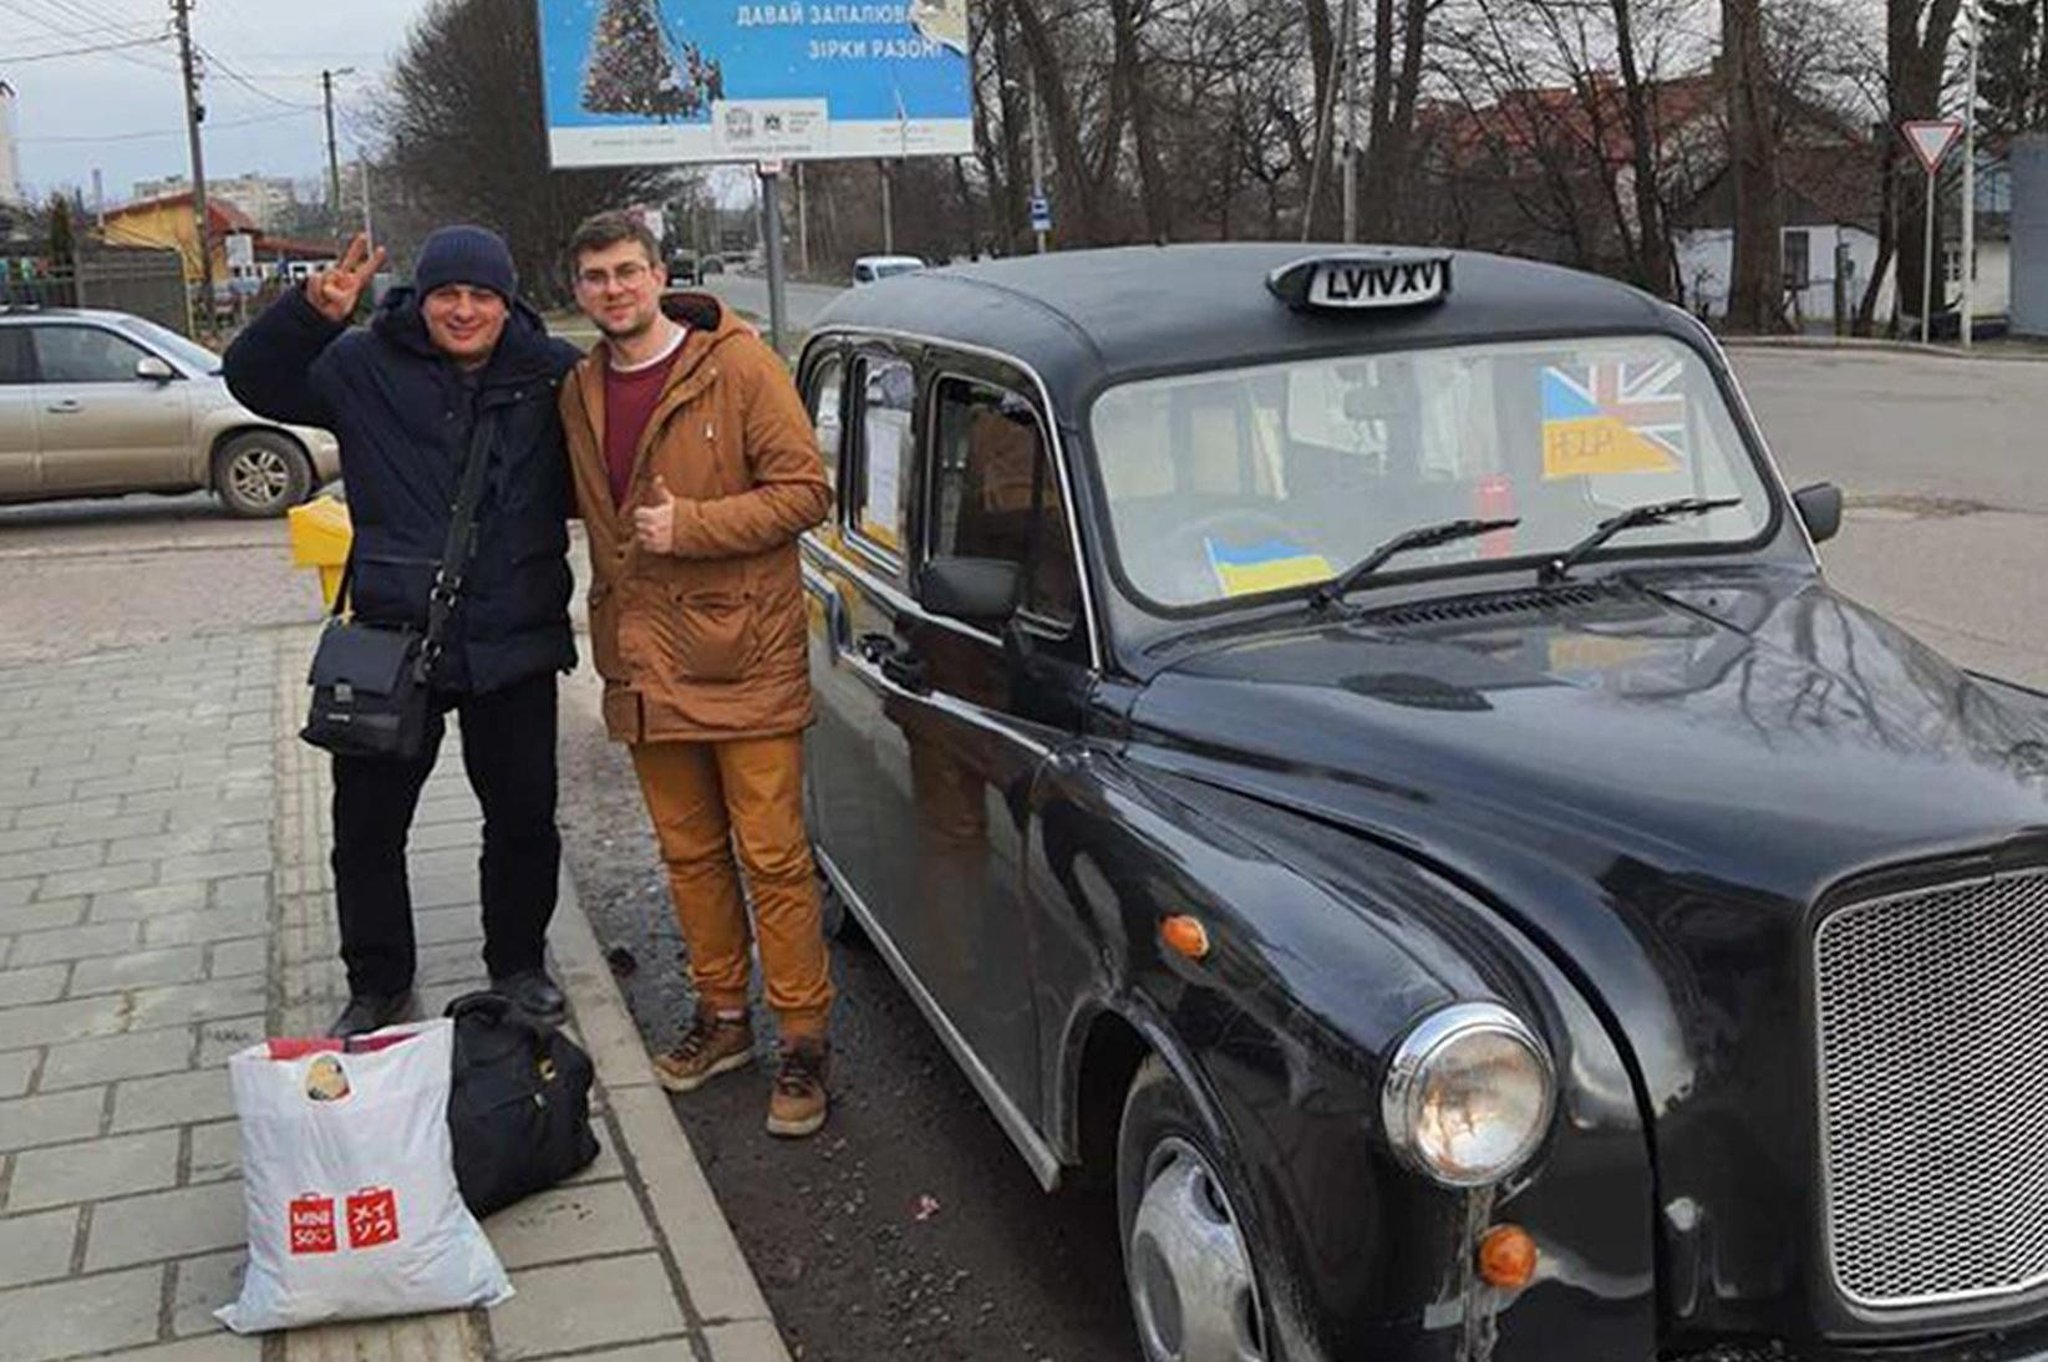 From Portadown to Ukraine in a black cab